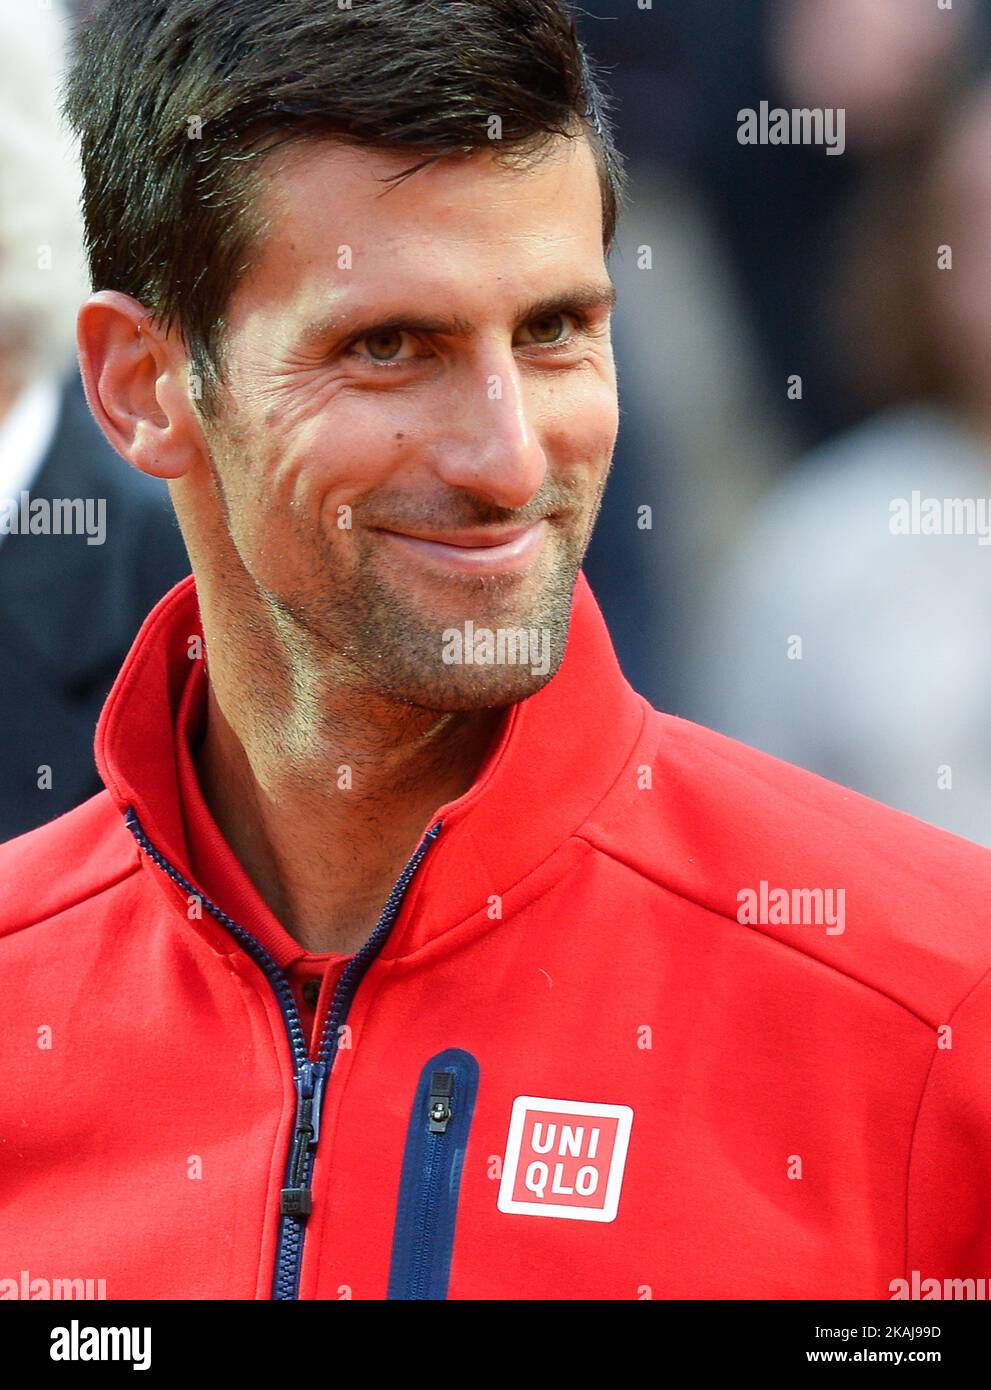 Serbia's Novak smiles during the final match of the ATP Tennis Open tournament game at the Foro Italico in Rome on May 15, 2016.  (Photo by Silvia Lore/NurPhoto) *** Please Use Credit from Credit Field *** Stock Photo